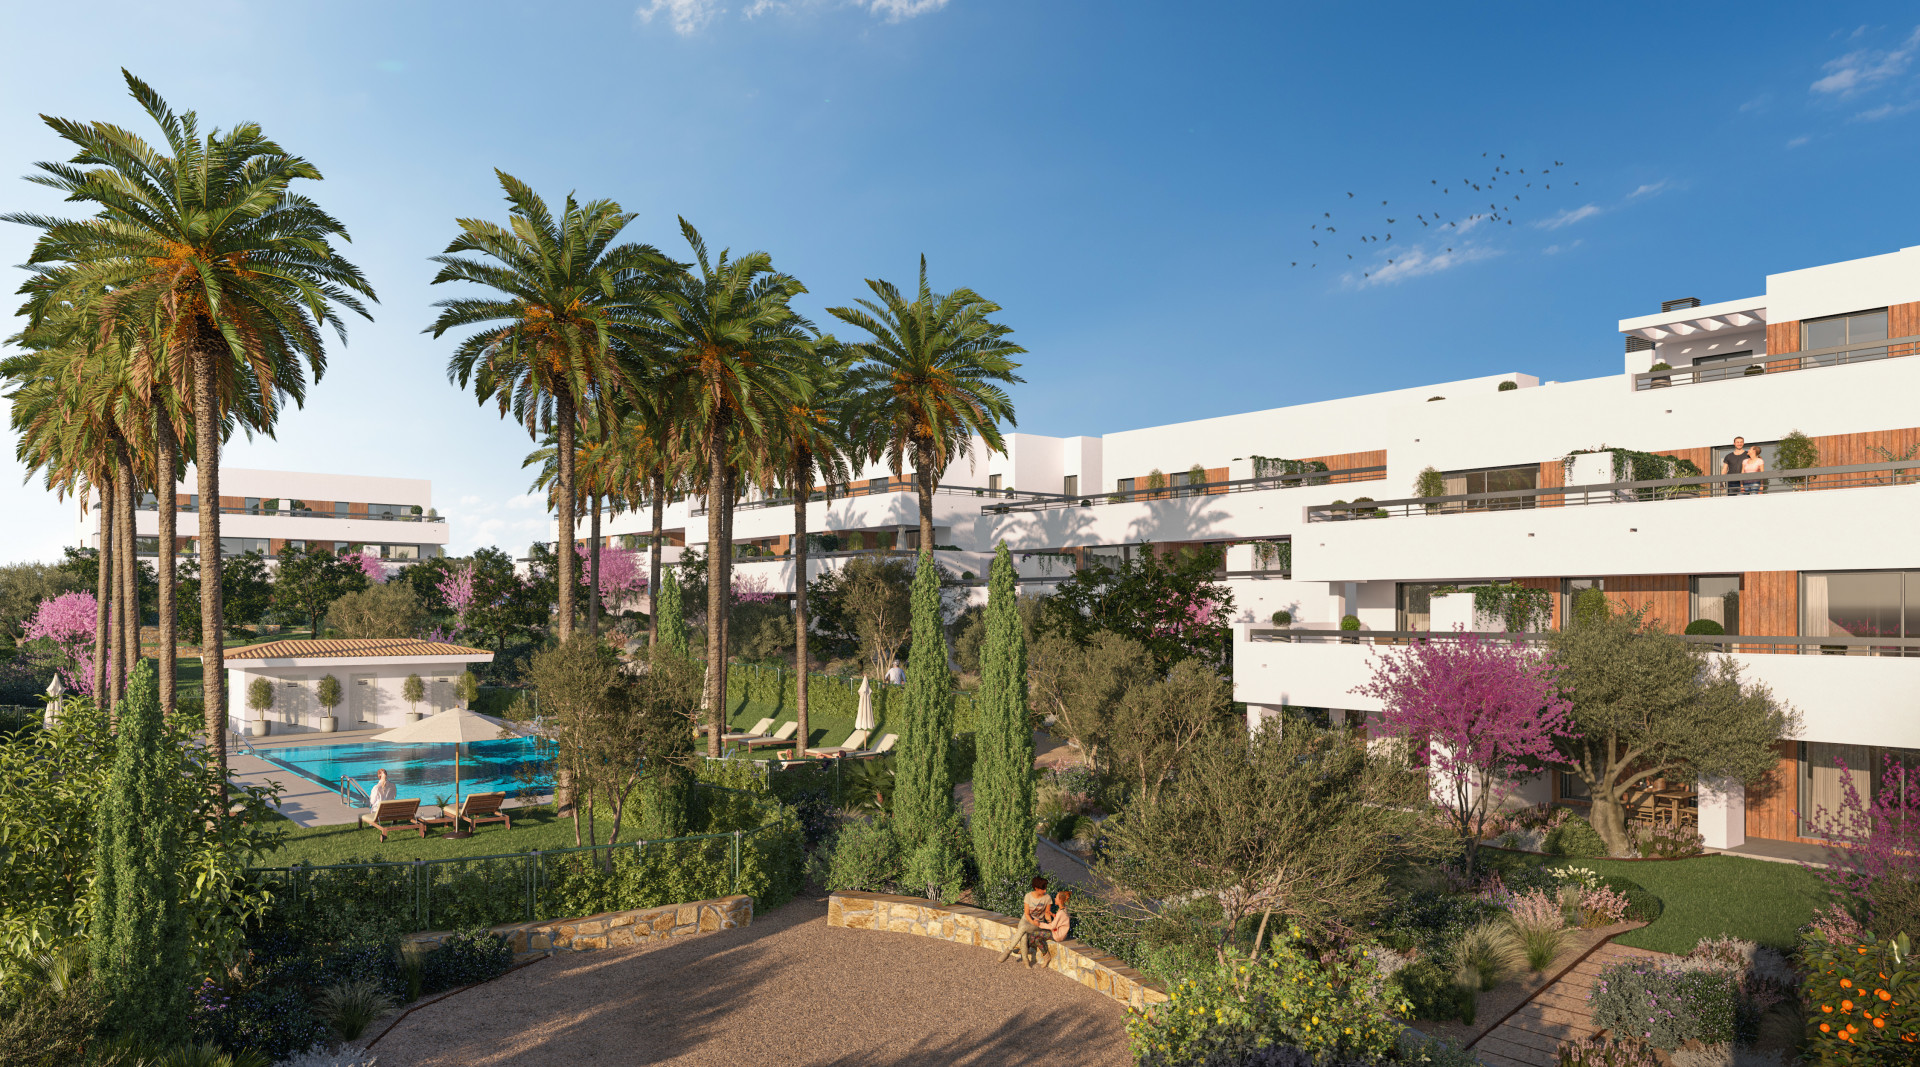 Off-plan contemporary apartments and penthouses for sale in Estepona west